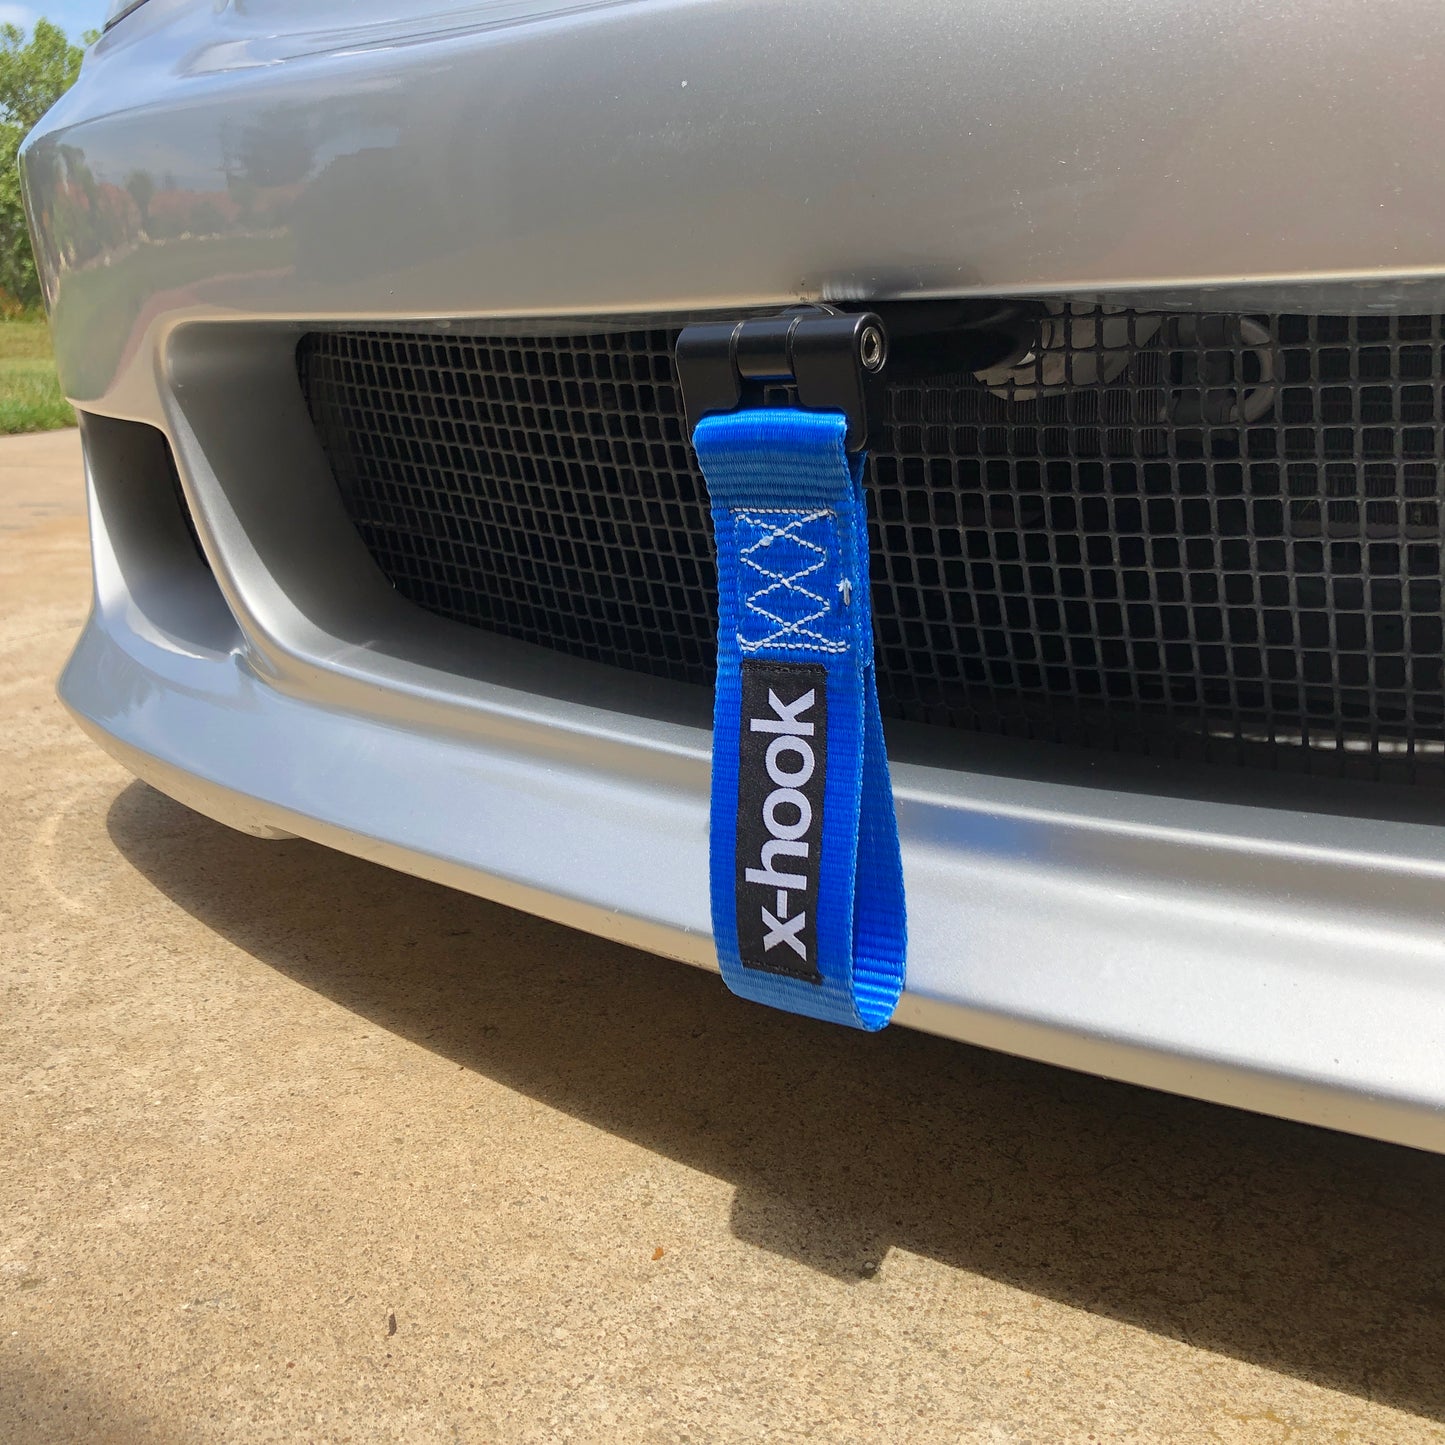 x-hook Tow Strap Attachment